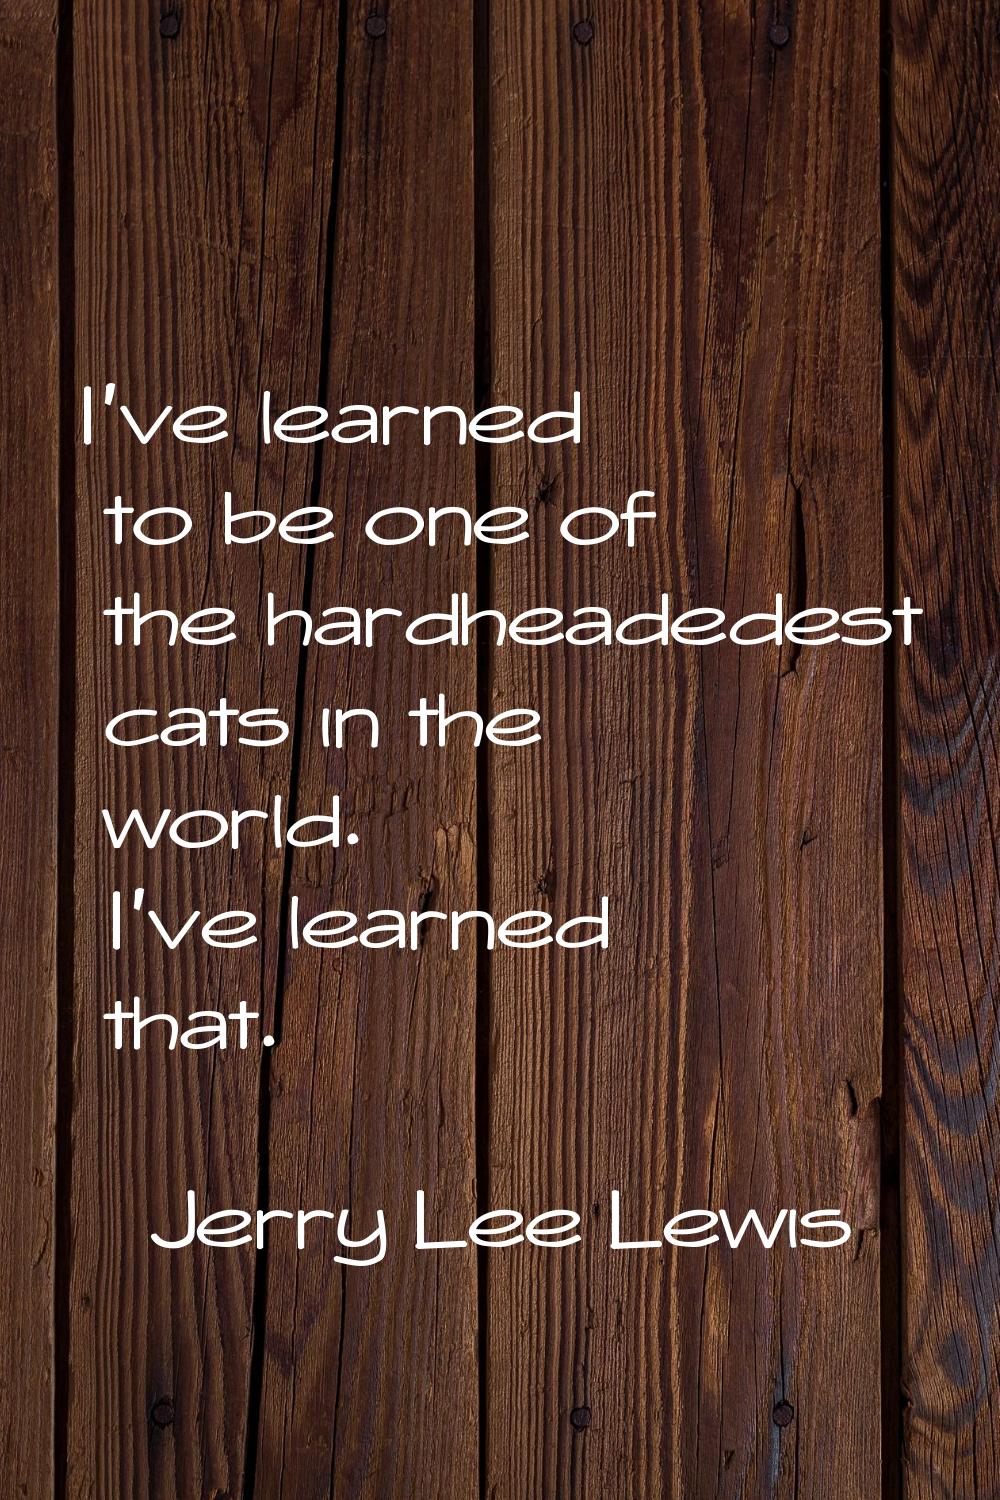 I've learned to be one of the hardheadedest cats in the world. I've learned that.